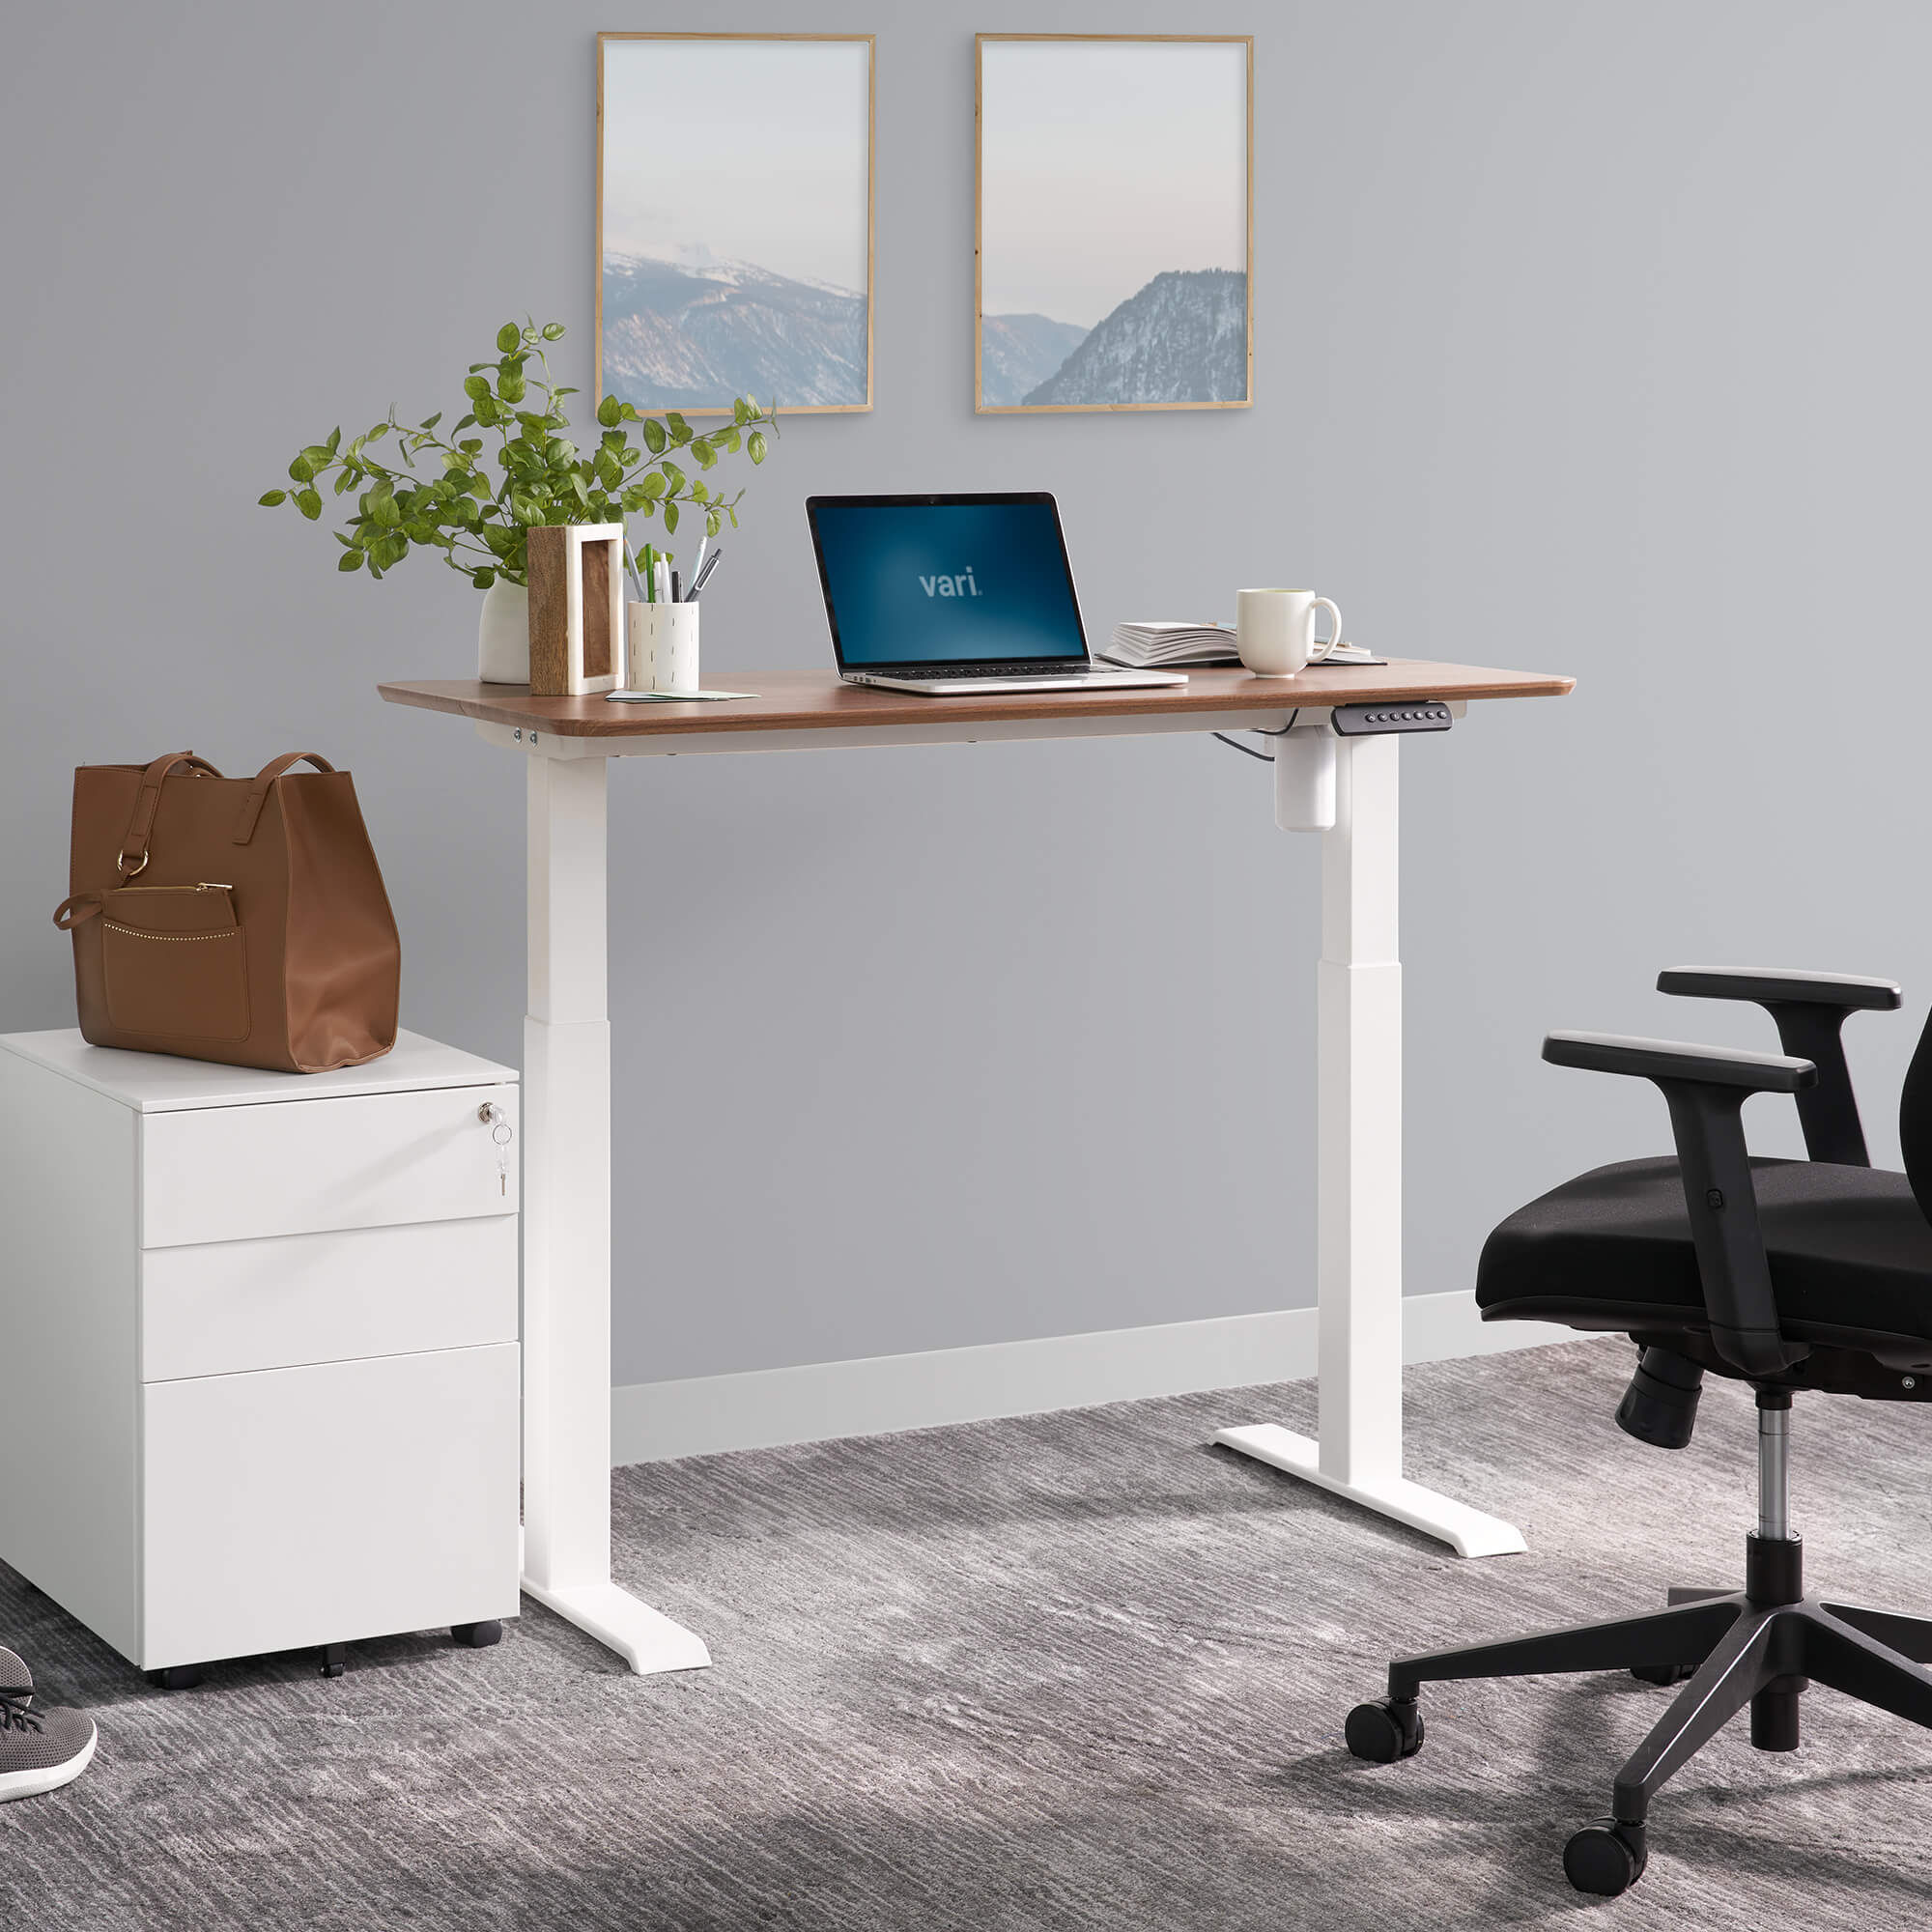 Hazel Wood Vari Essential Electric Standing Desk 48 x 24 Height Adjustable Sit to Stand Desk for The Home Office Splice Top Desktop with Stable T-Style Legs 